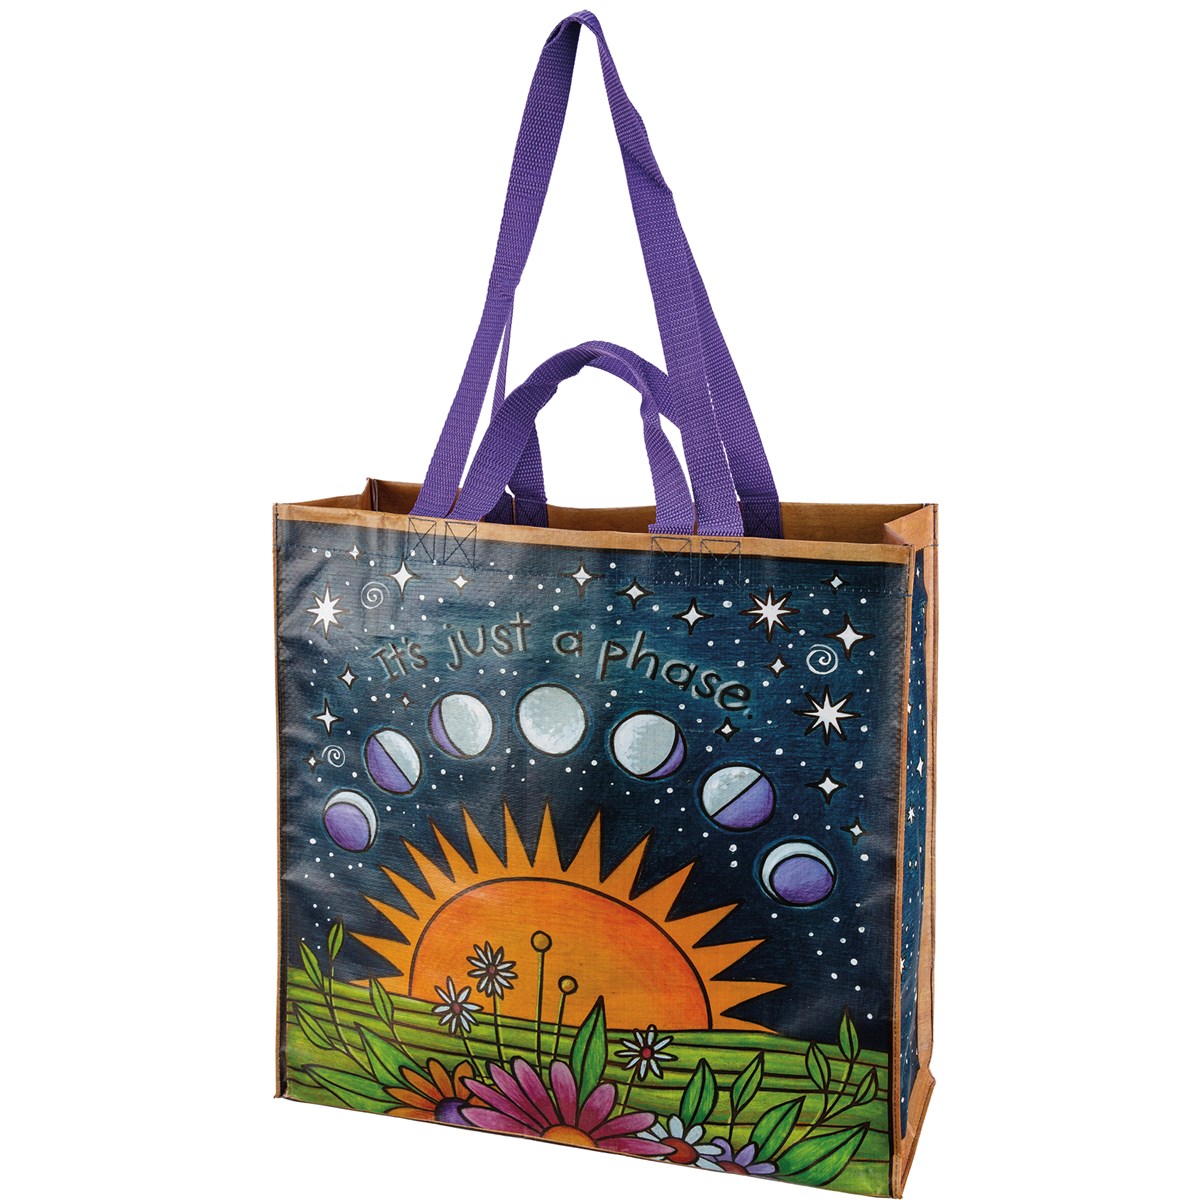 Market Tote - Never Stop Looking Up - 15.50" x 15.25" x 6" - Post-Consumer Material, Nylon